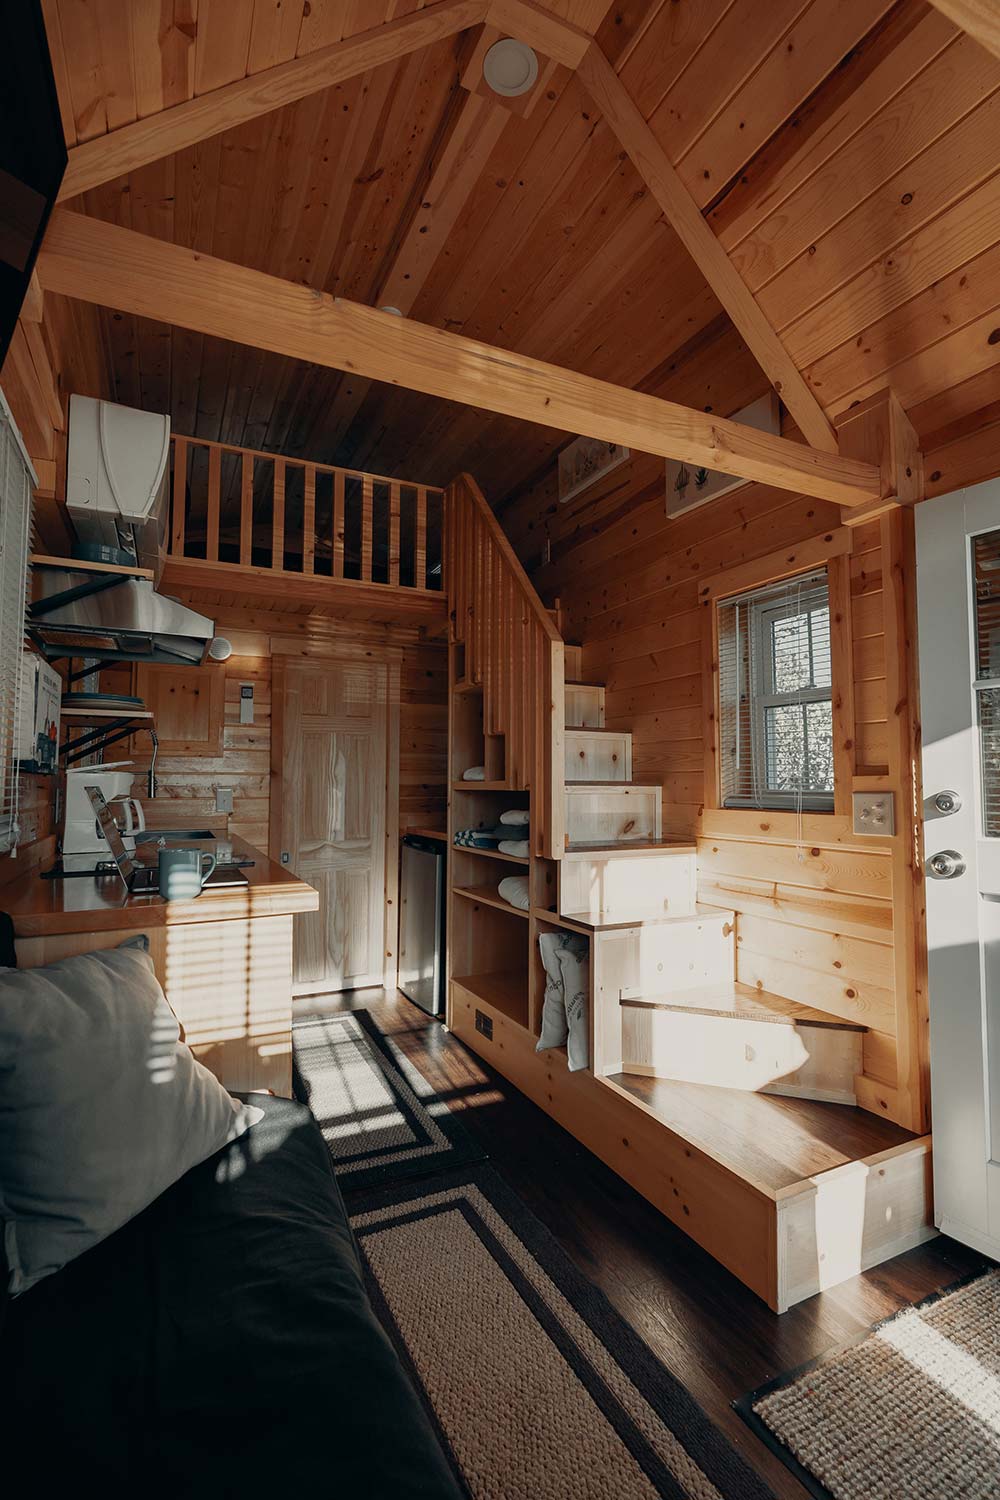 In this tiny house, the stairs do double duty as storage. 